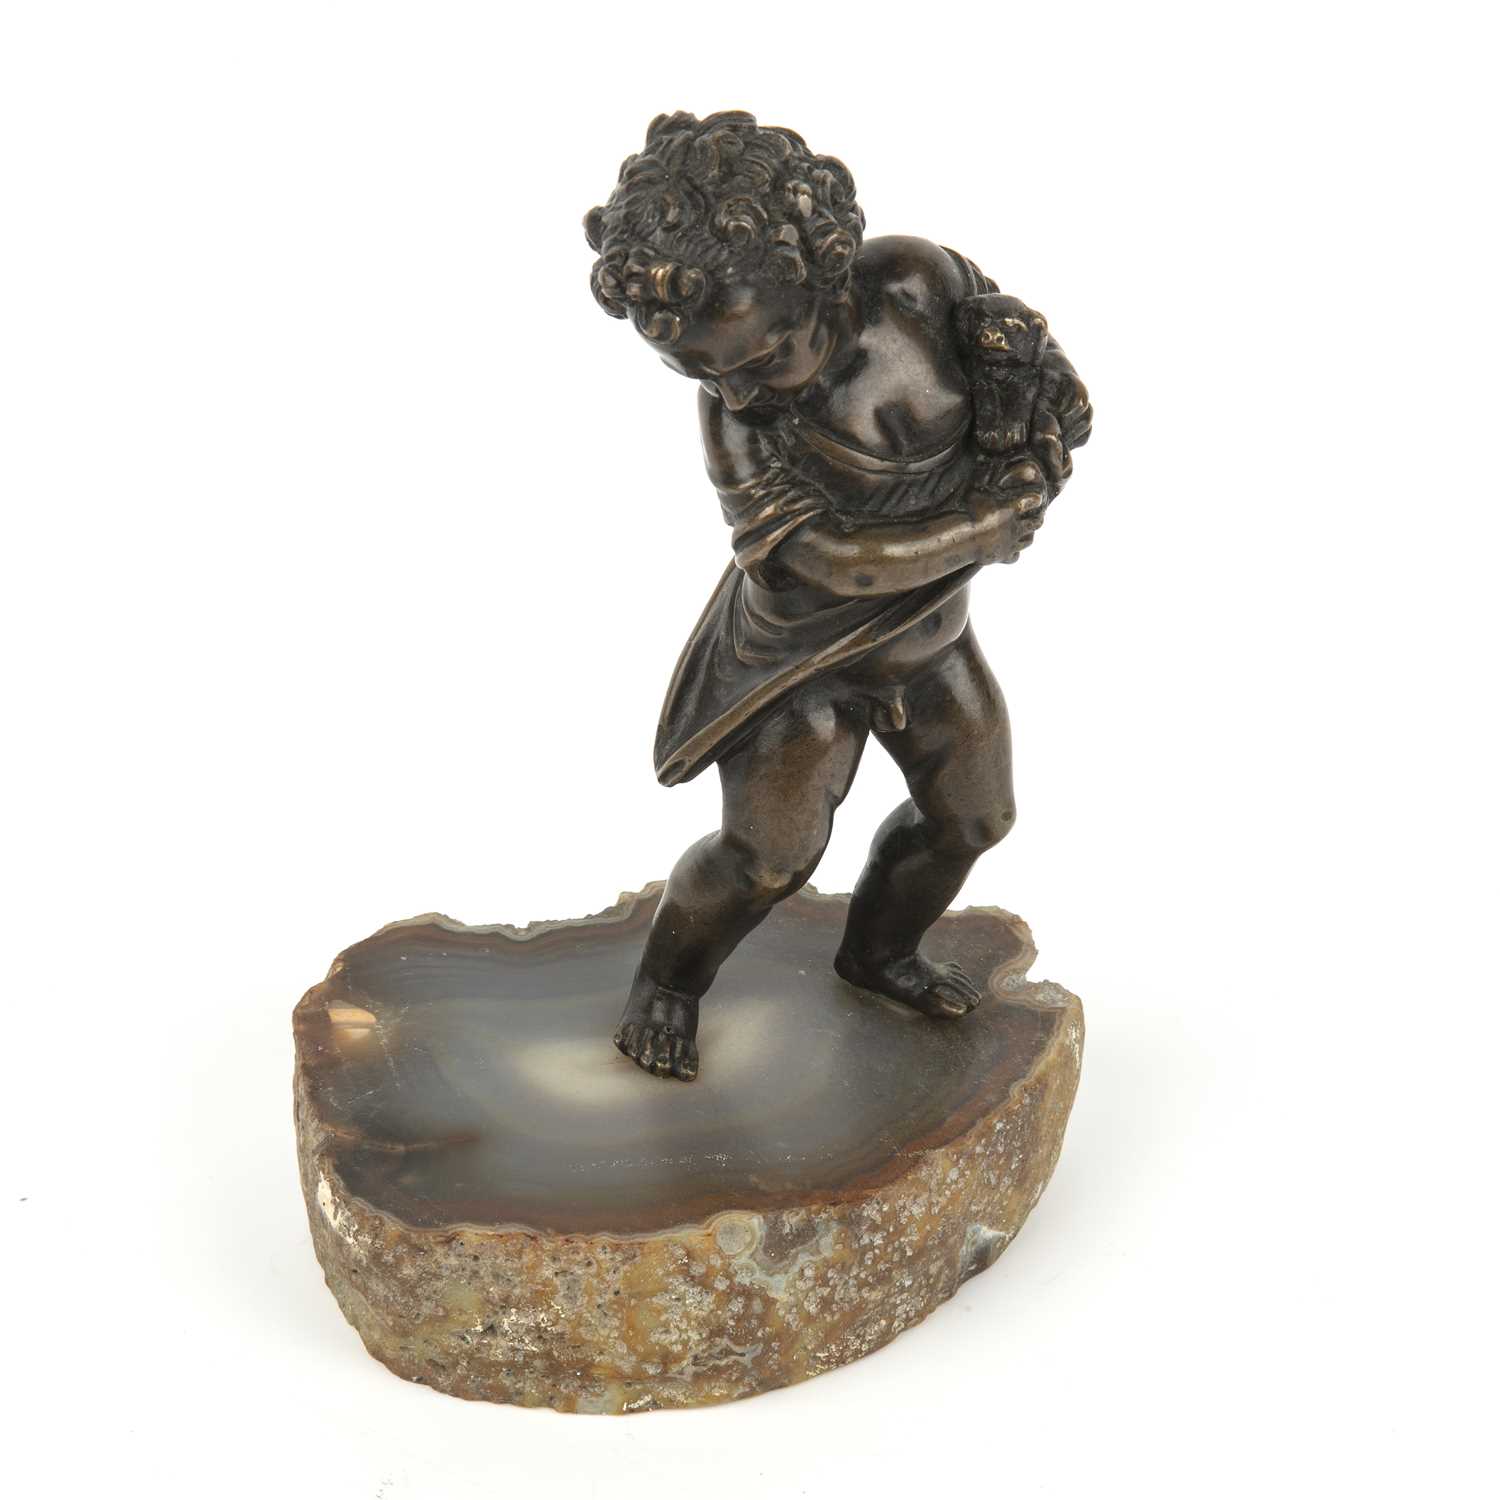 An 18th century bronze cherub with a small dog in its arms, mounted on a later agate slice, - Image 3 of 4